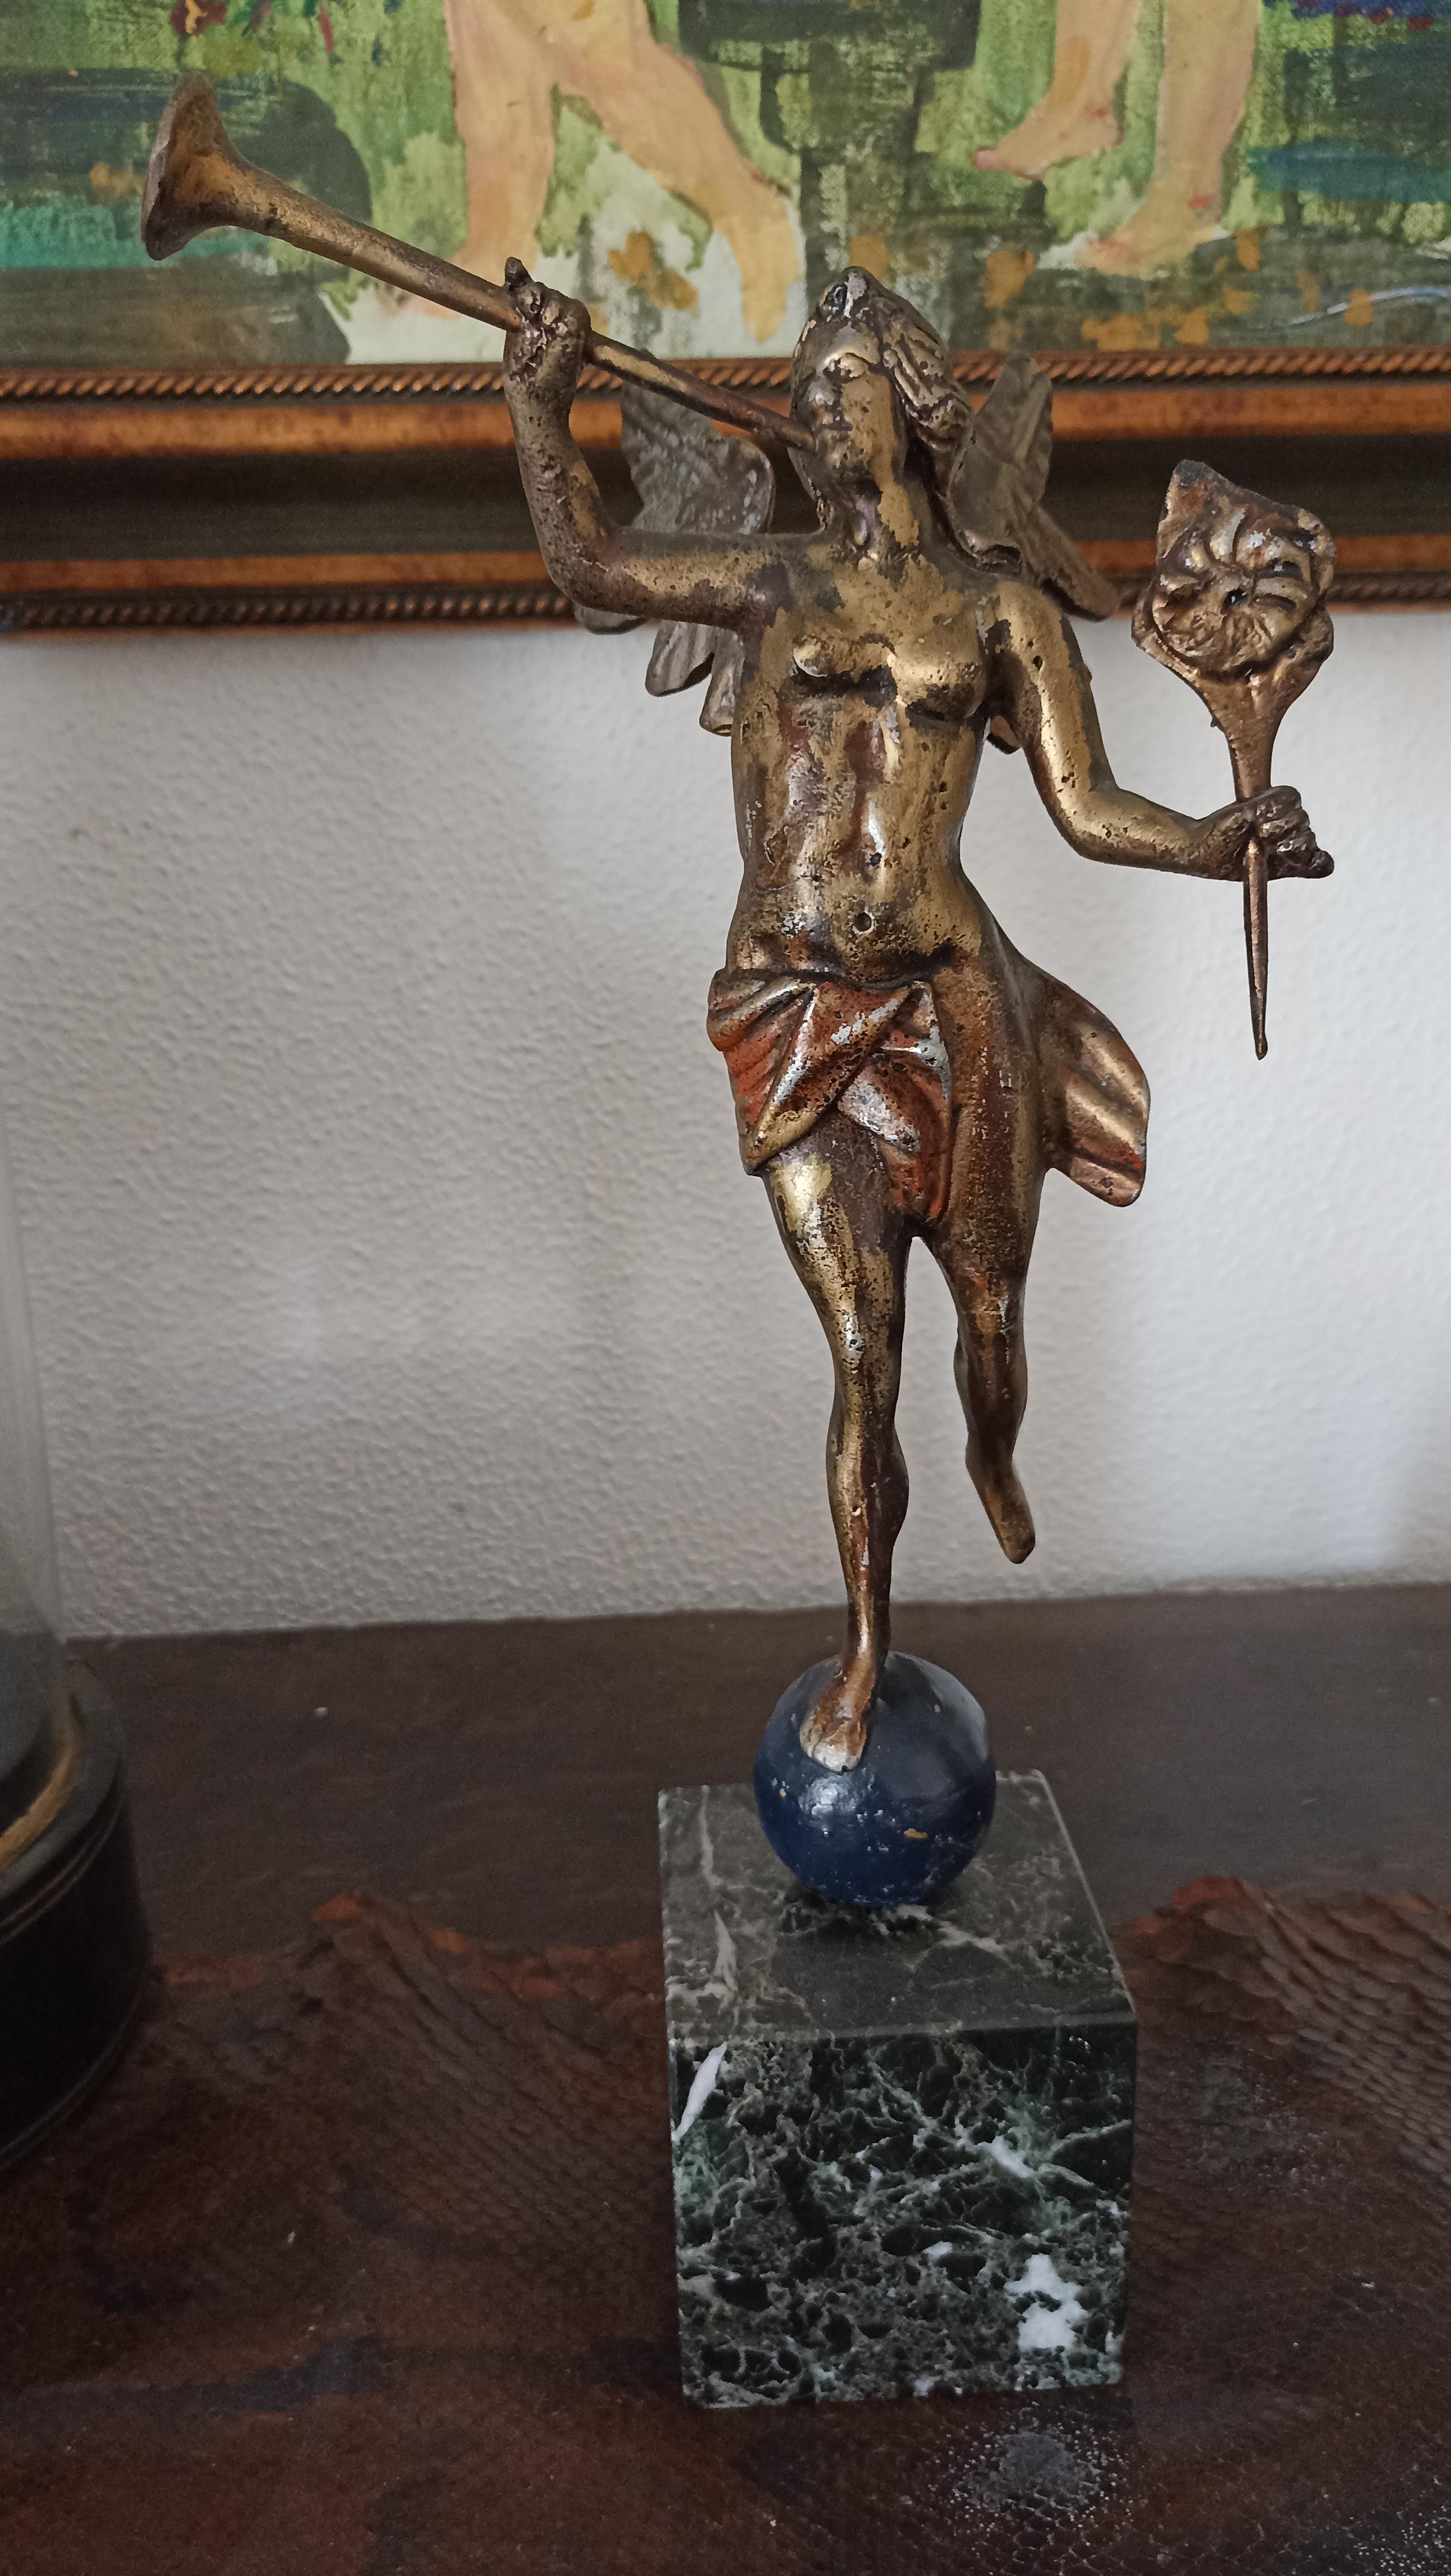 Dutch Highly Decorative 18th Century Cold Painted Solid Bronze Atlas Figure &Cherubs For Sale